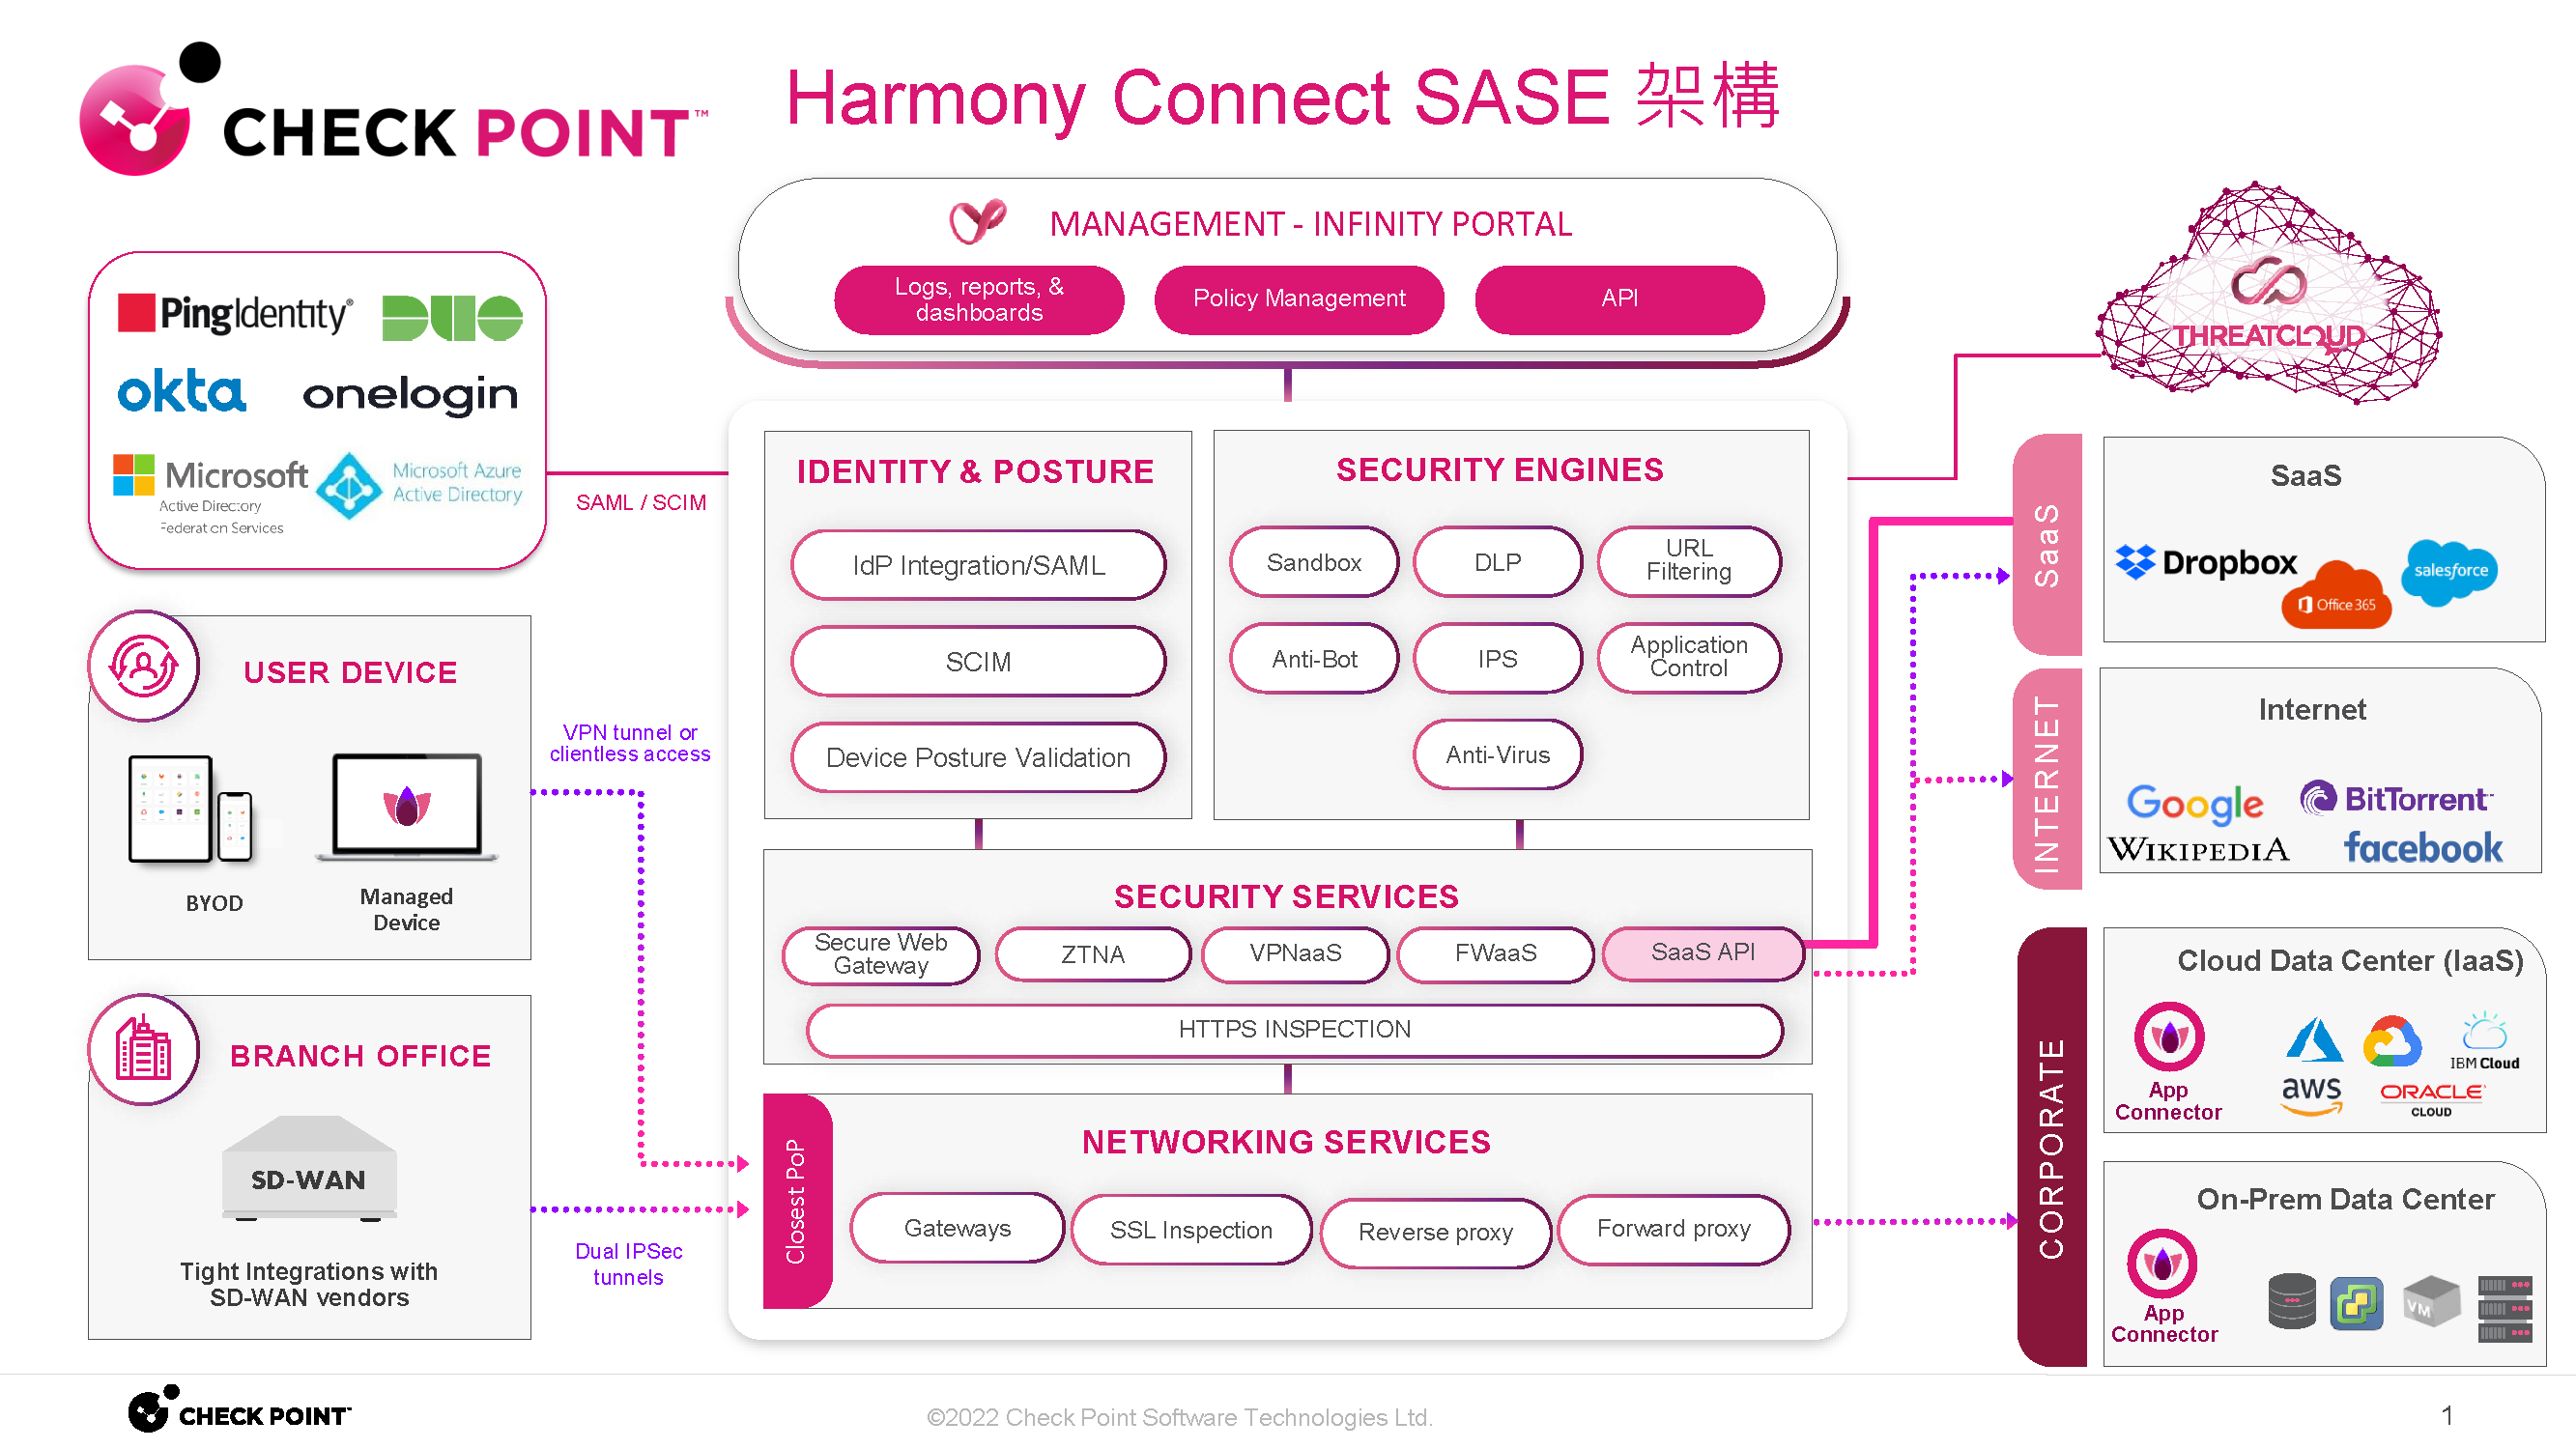 Harmony Connect SASE Overview